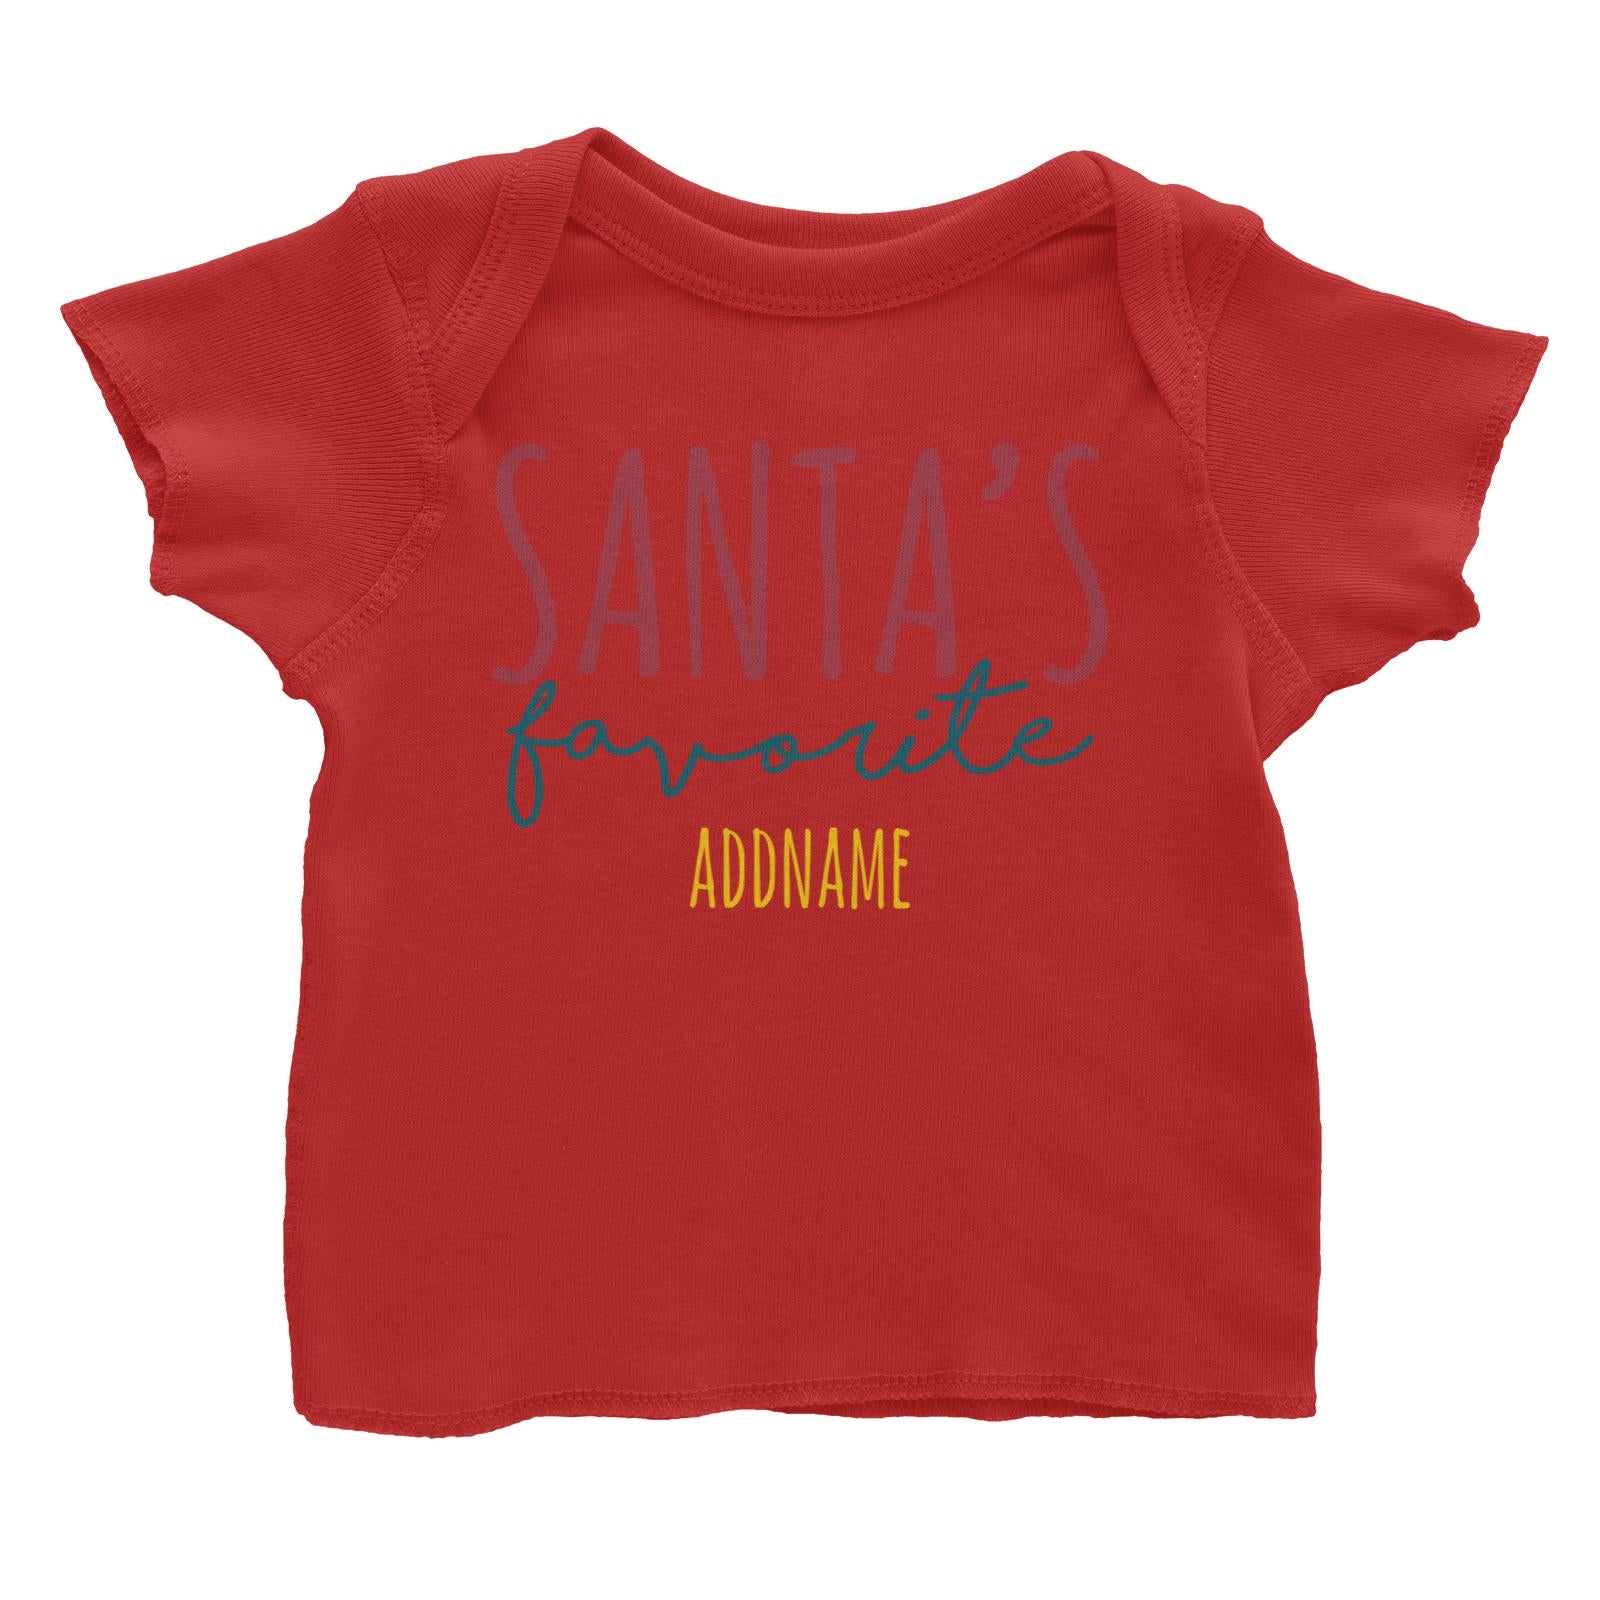 Santa's Favourite Lettering Addname Baby T-Shirt